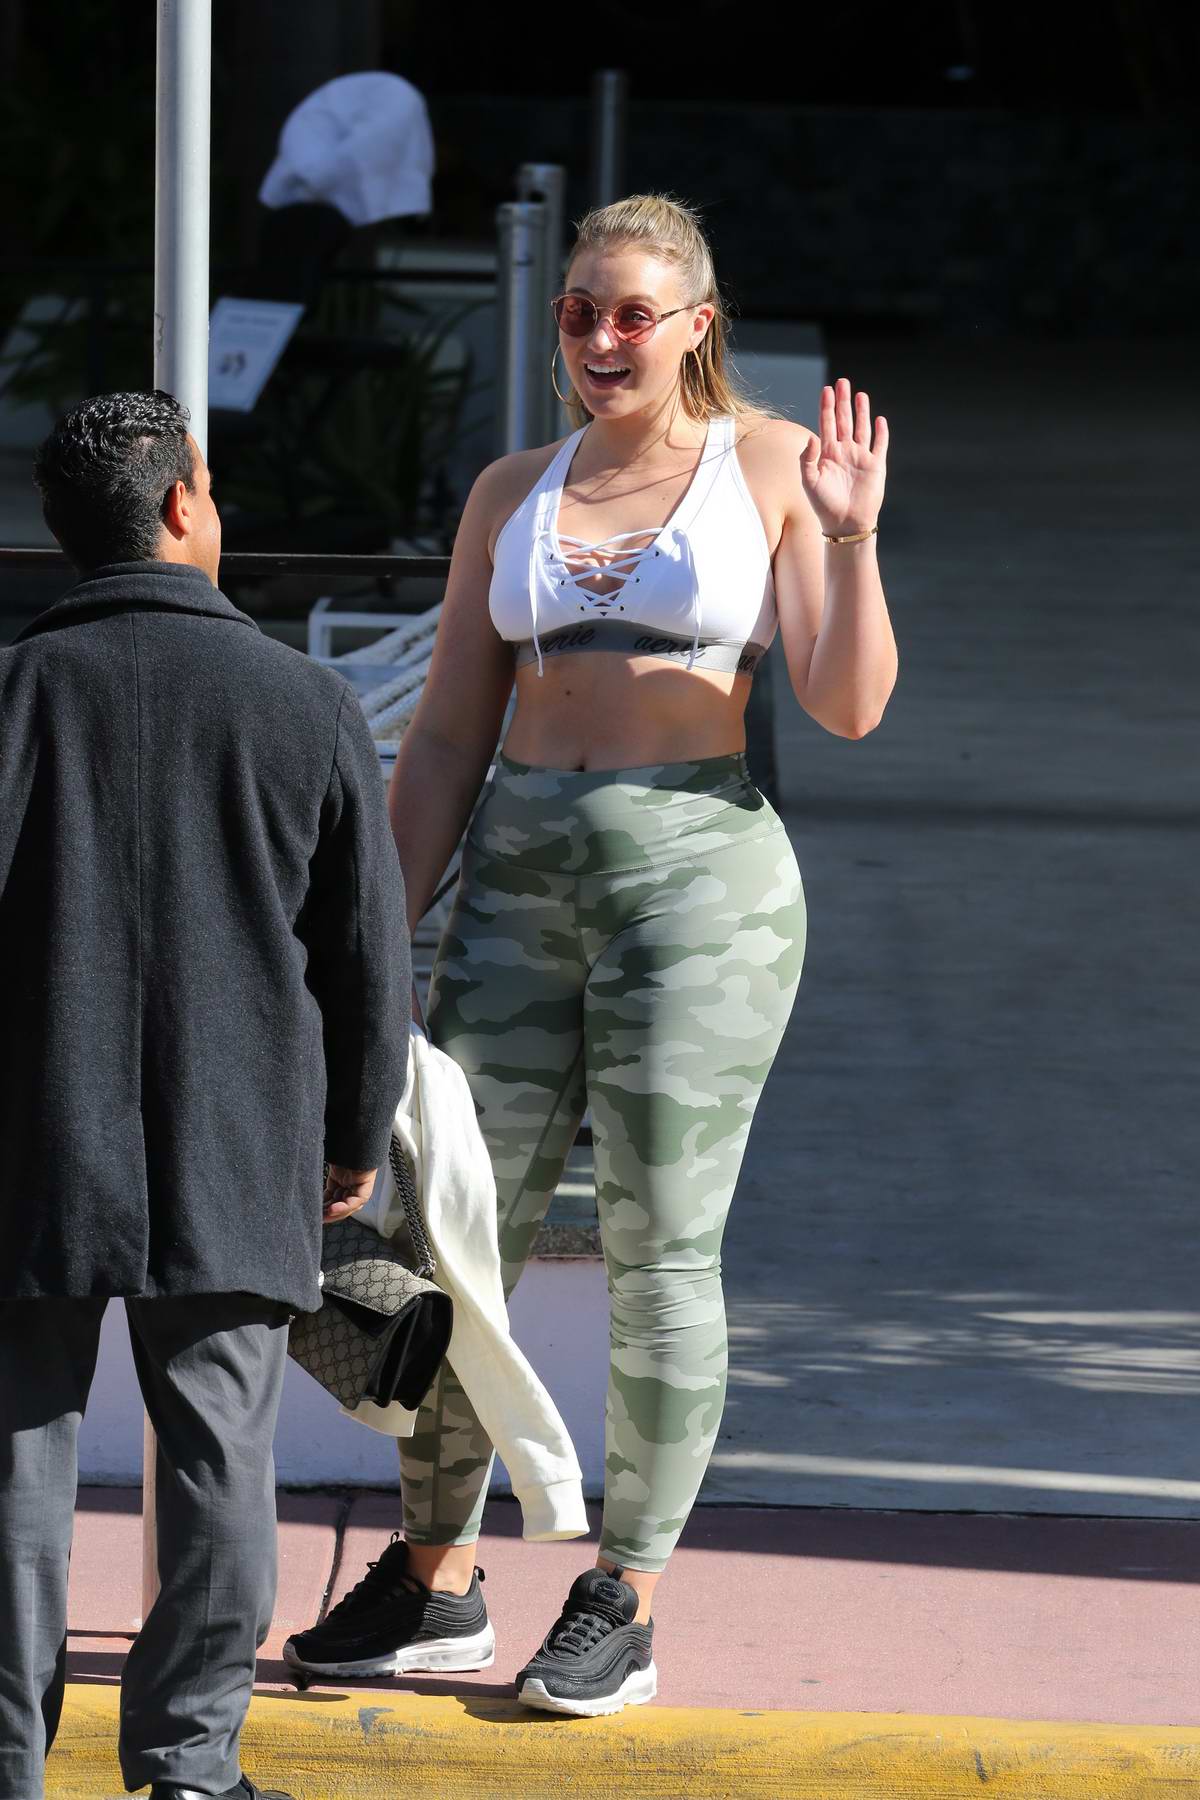 https://www.celebsfirst.com/wp-content/uploads/2017/12/iskra-lawrence-wearing-camo-yoga-pants-and-a-sports-bra-as-she-heads-out-with-friends-in-miami-121217_6.jpg